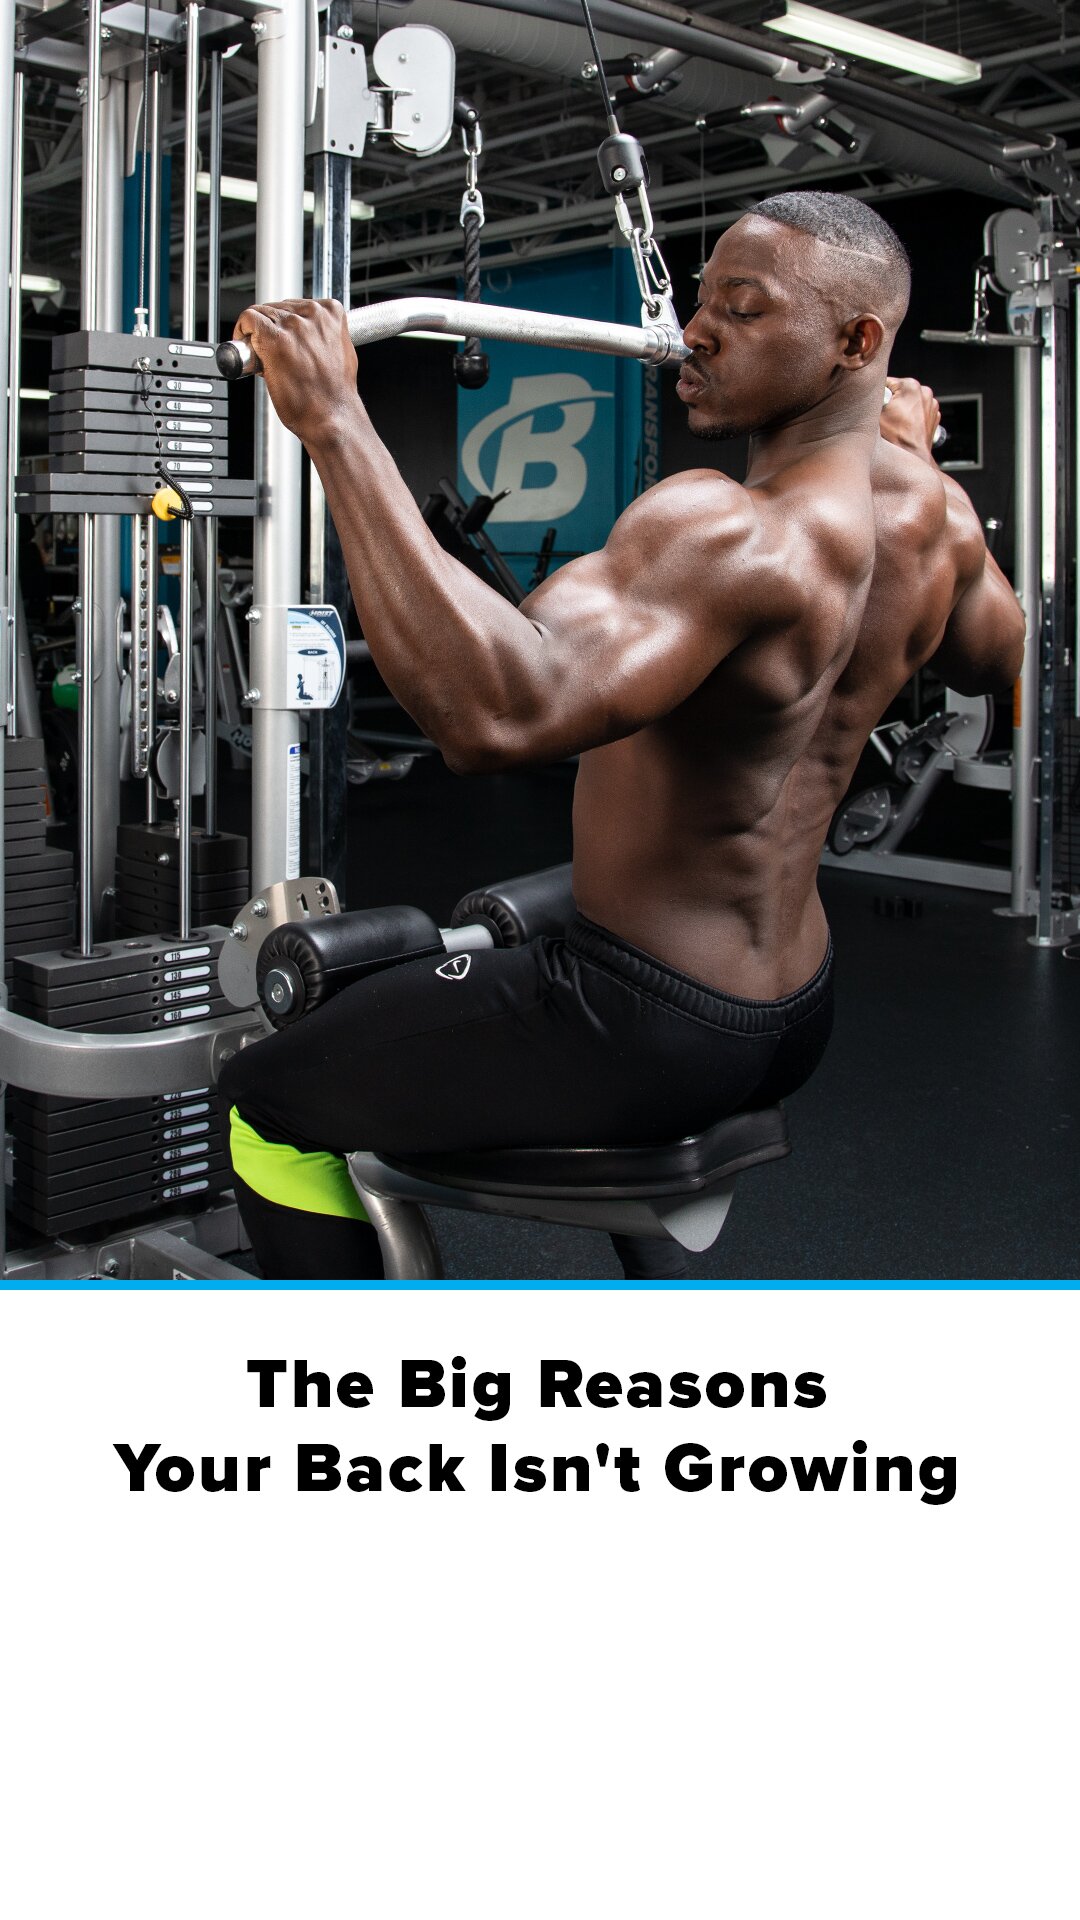 The Big Reasons Your Back Isn't Growing